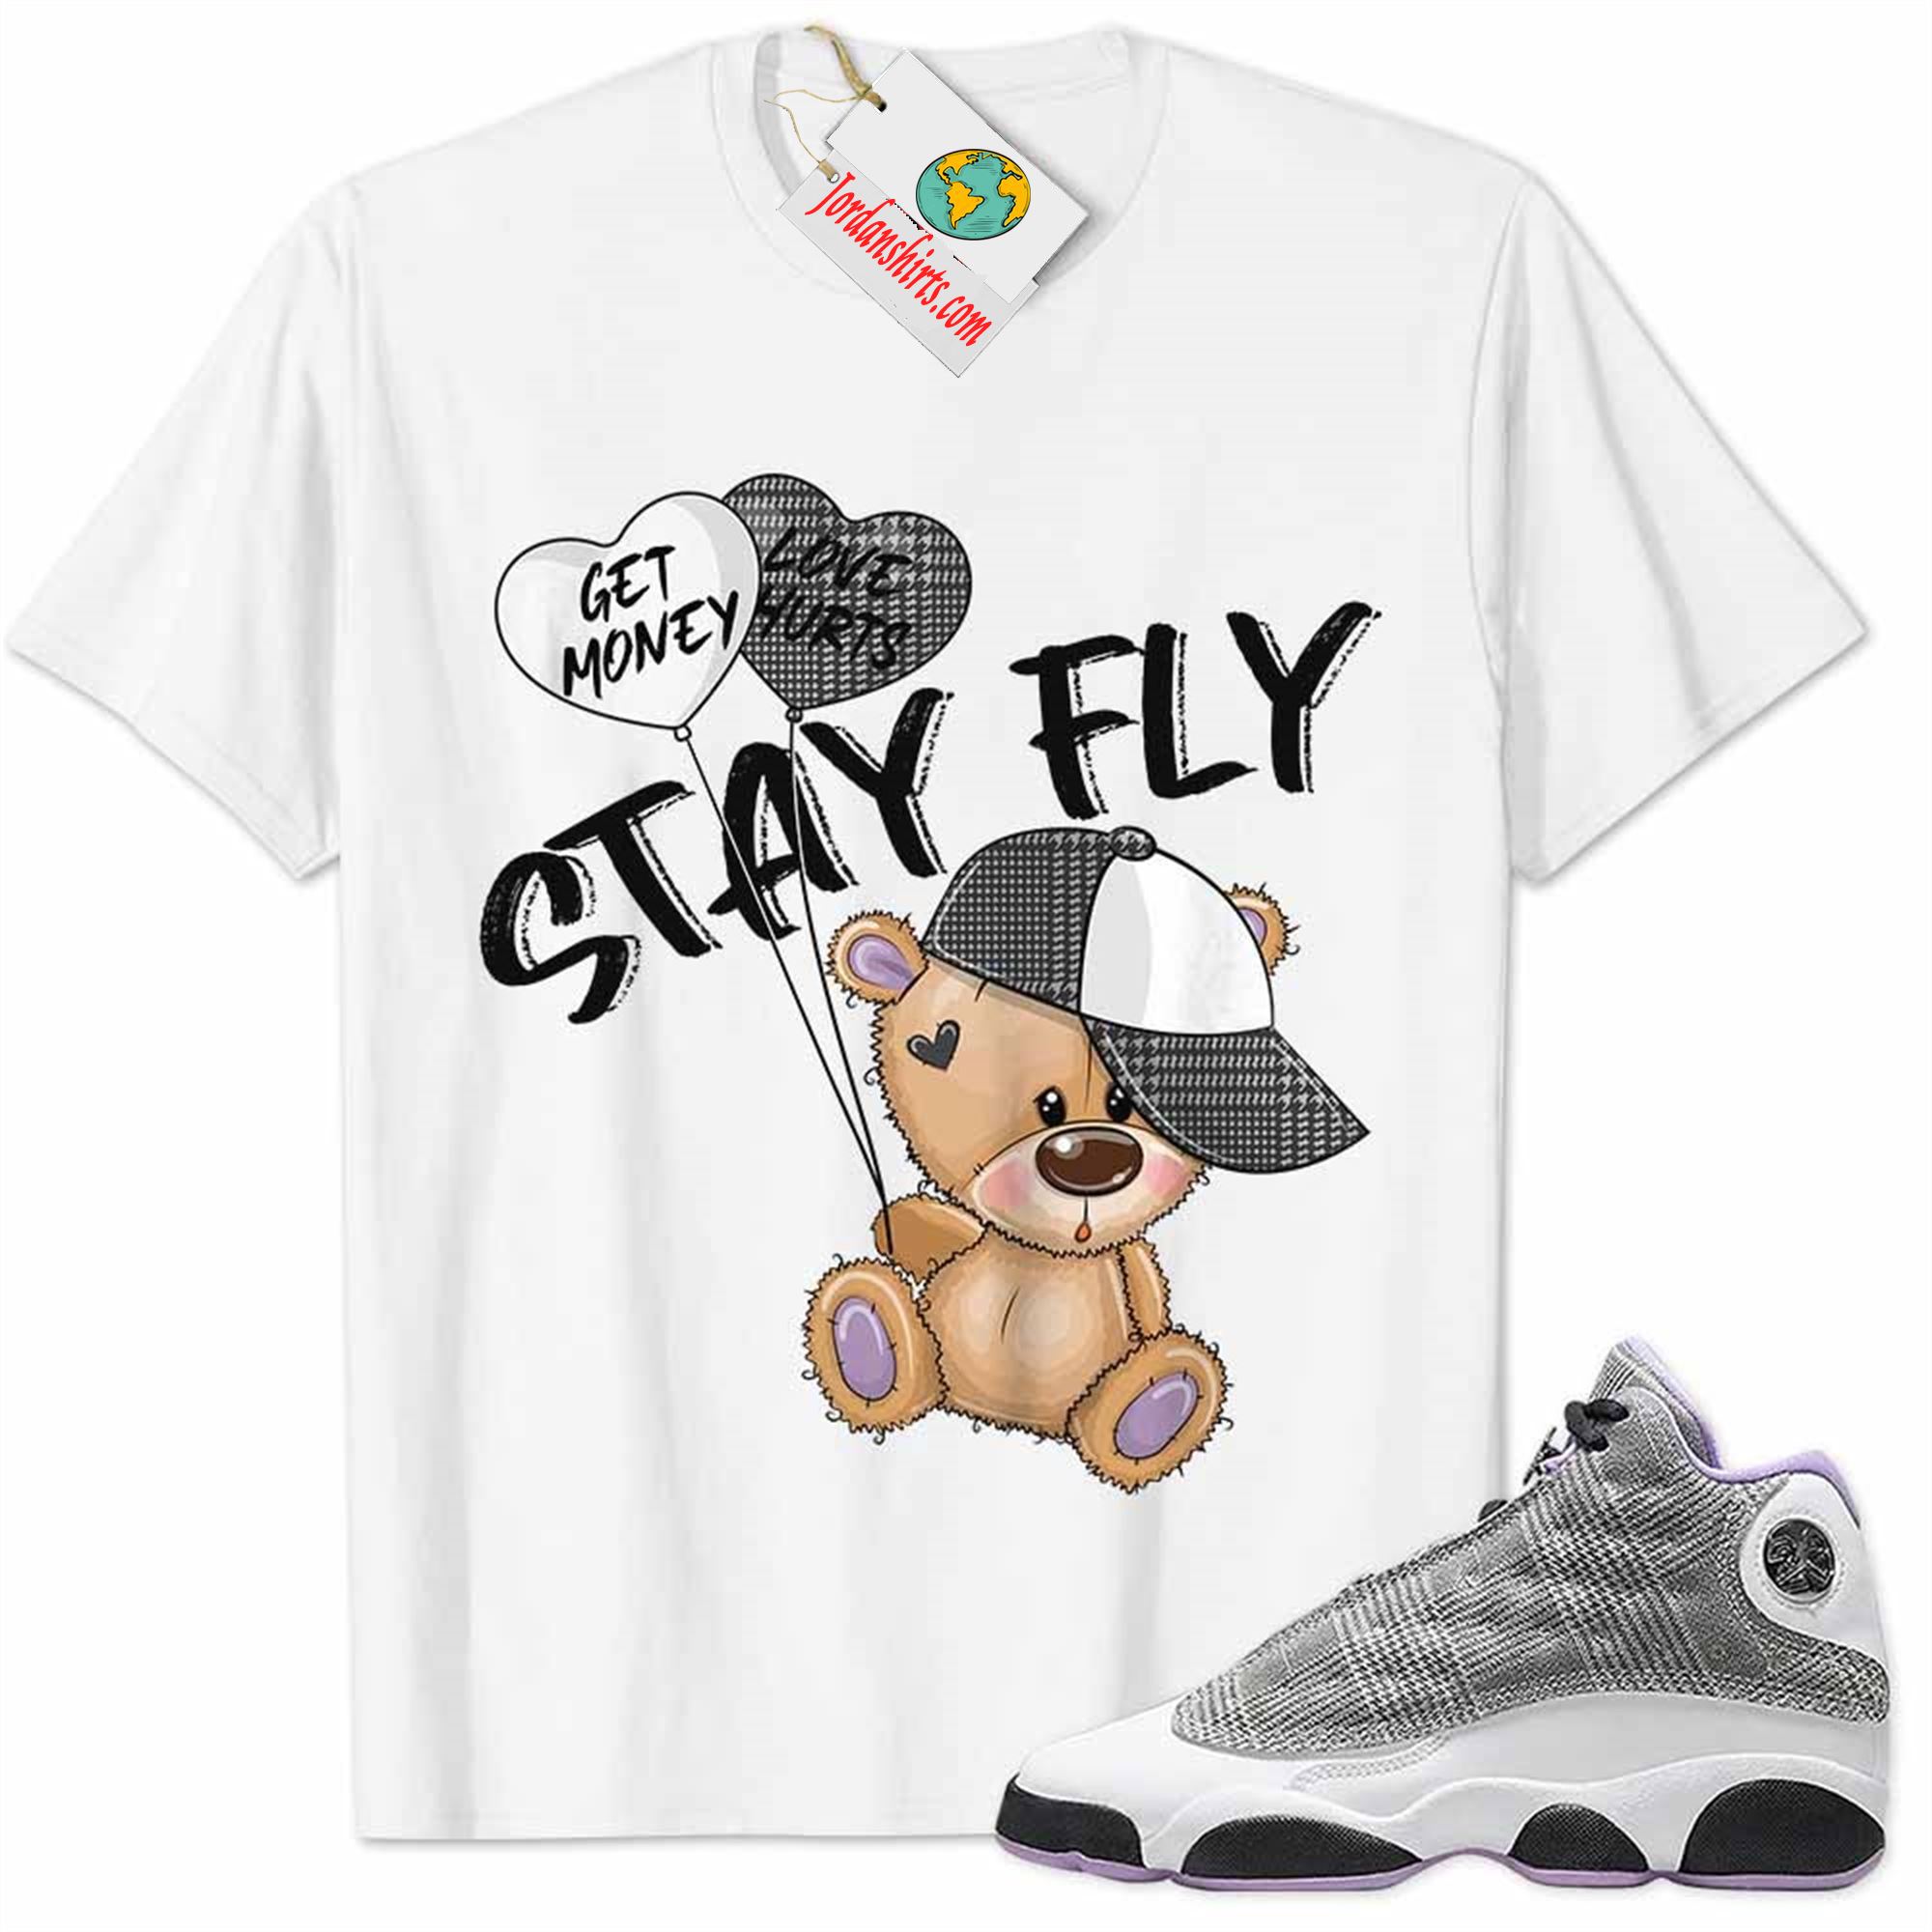 Jordan 13 Shirt, Houndstooth 13s Shirt Cute Teddy Bear Stay Fly Get Money White Plus Size Up To 5xl